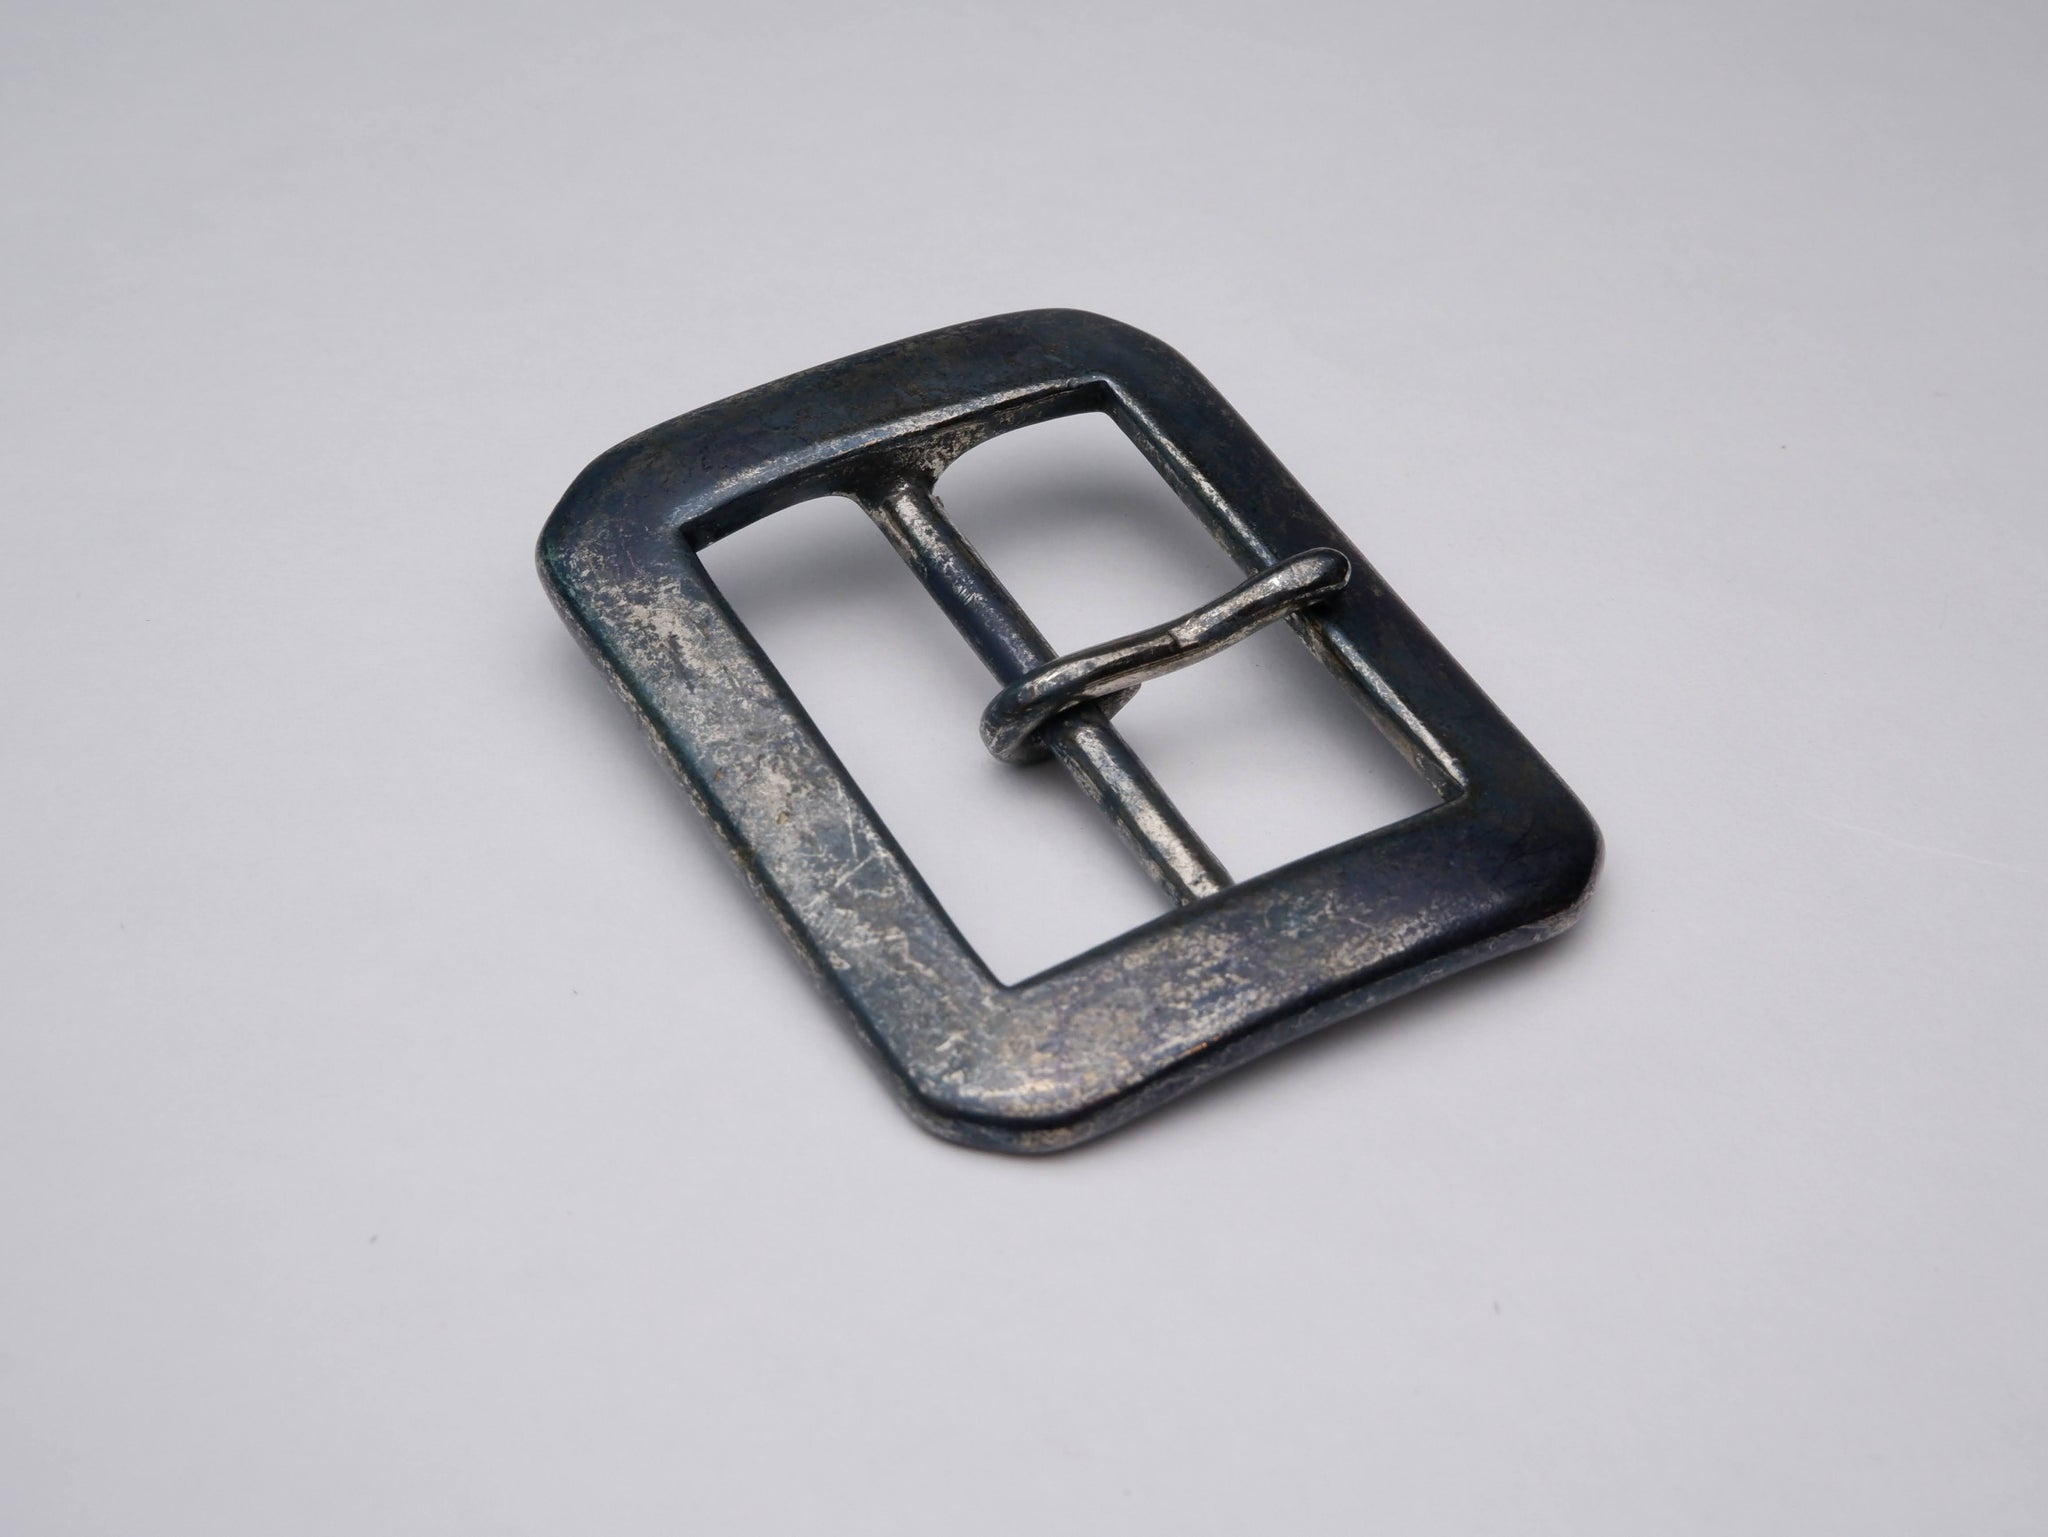 Japanese Buckle - Aged Nickel Single Prong (45mm)